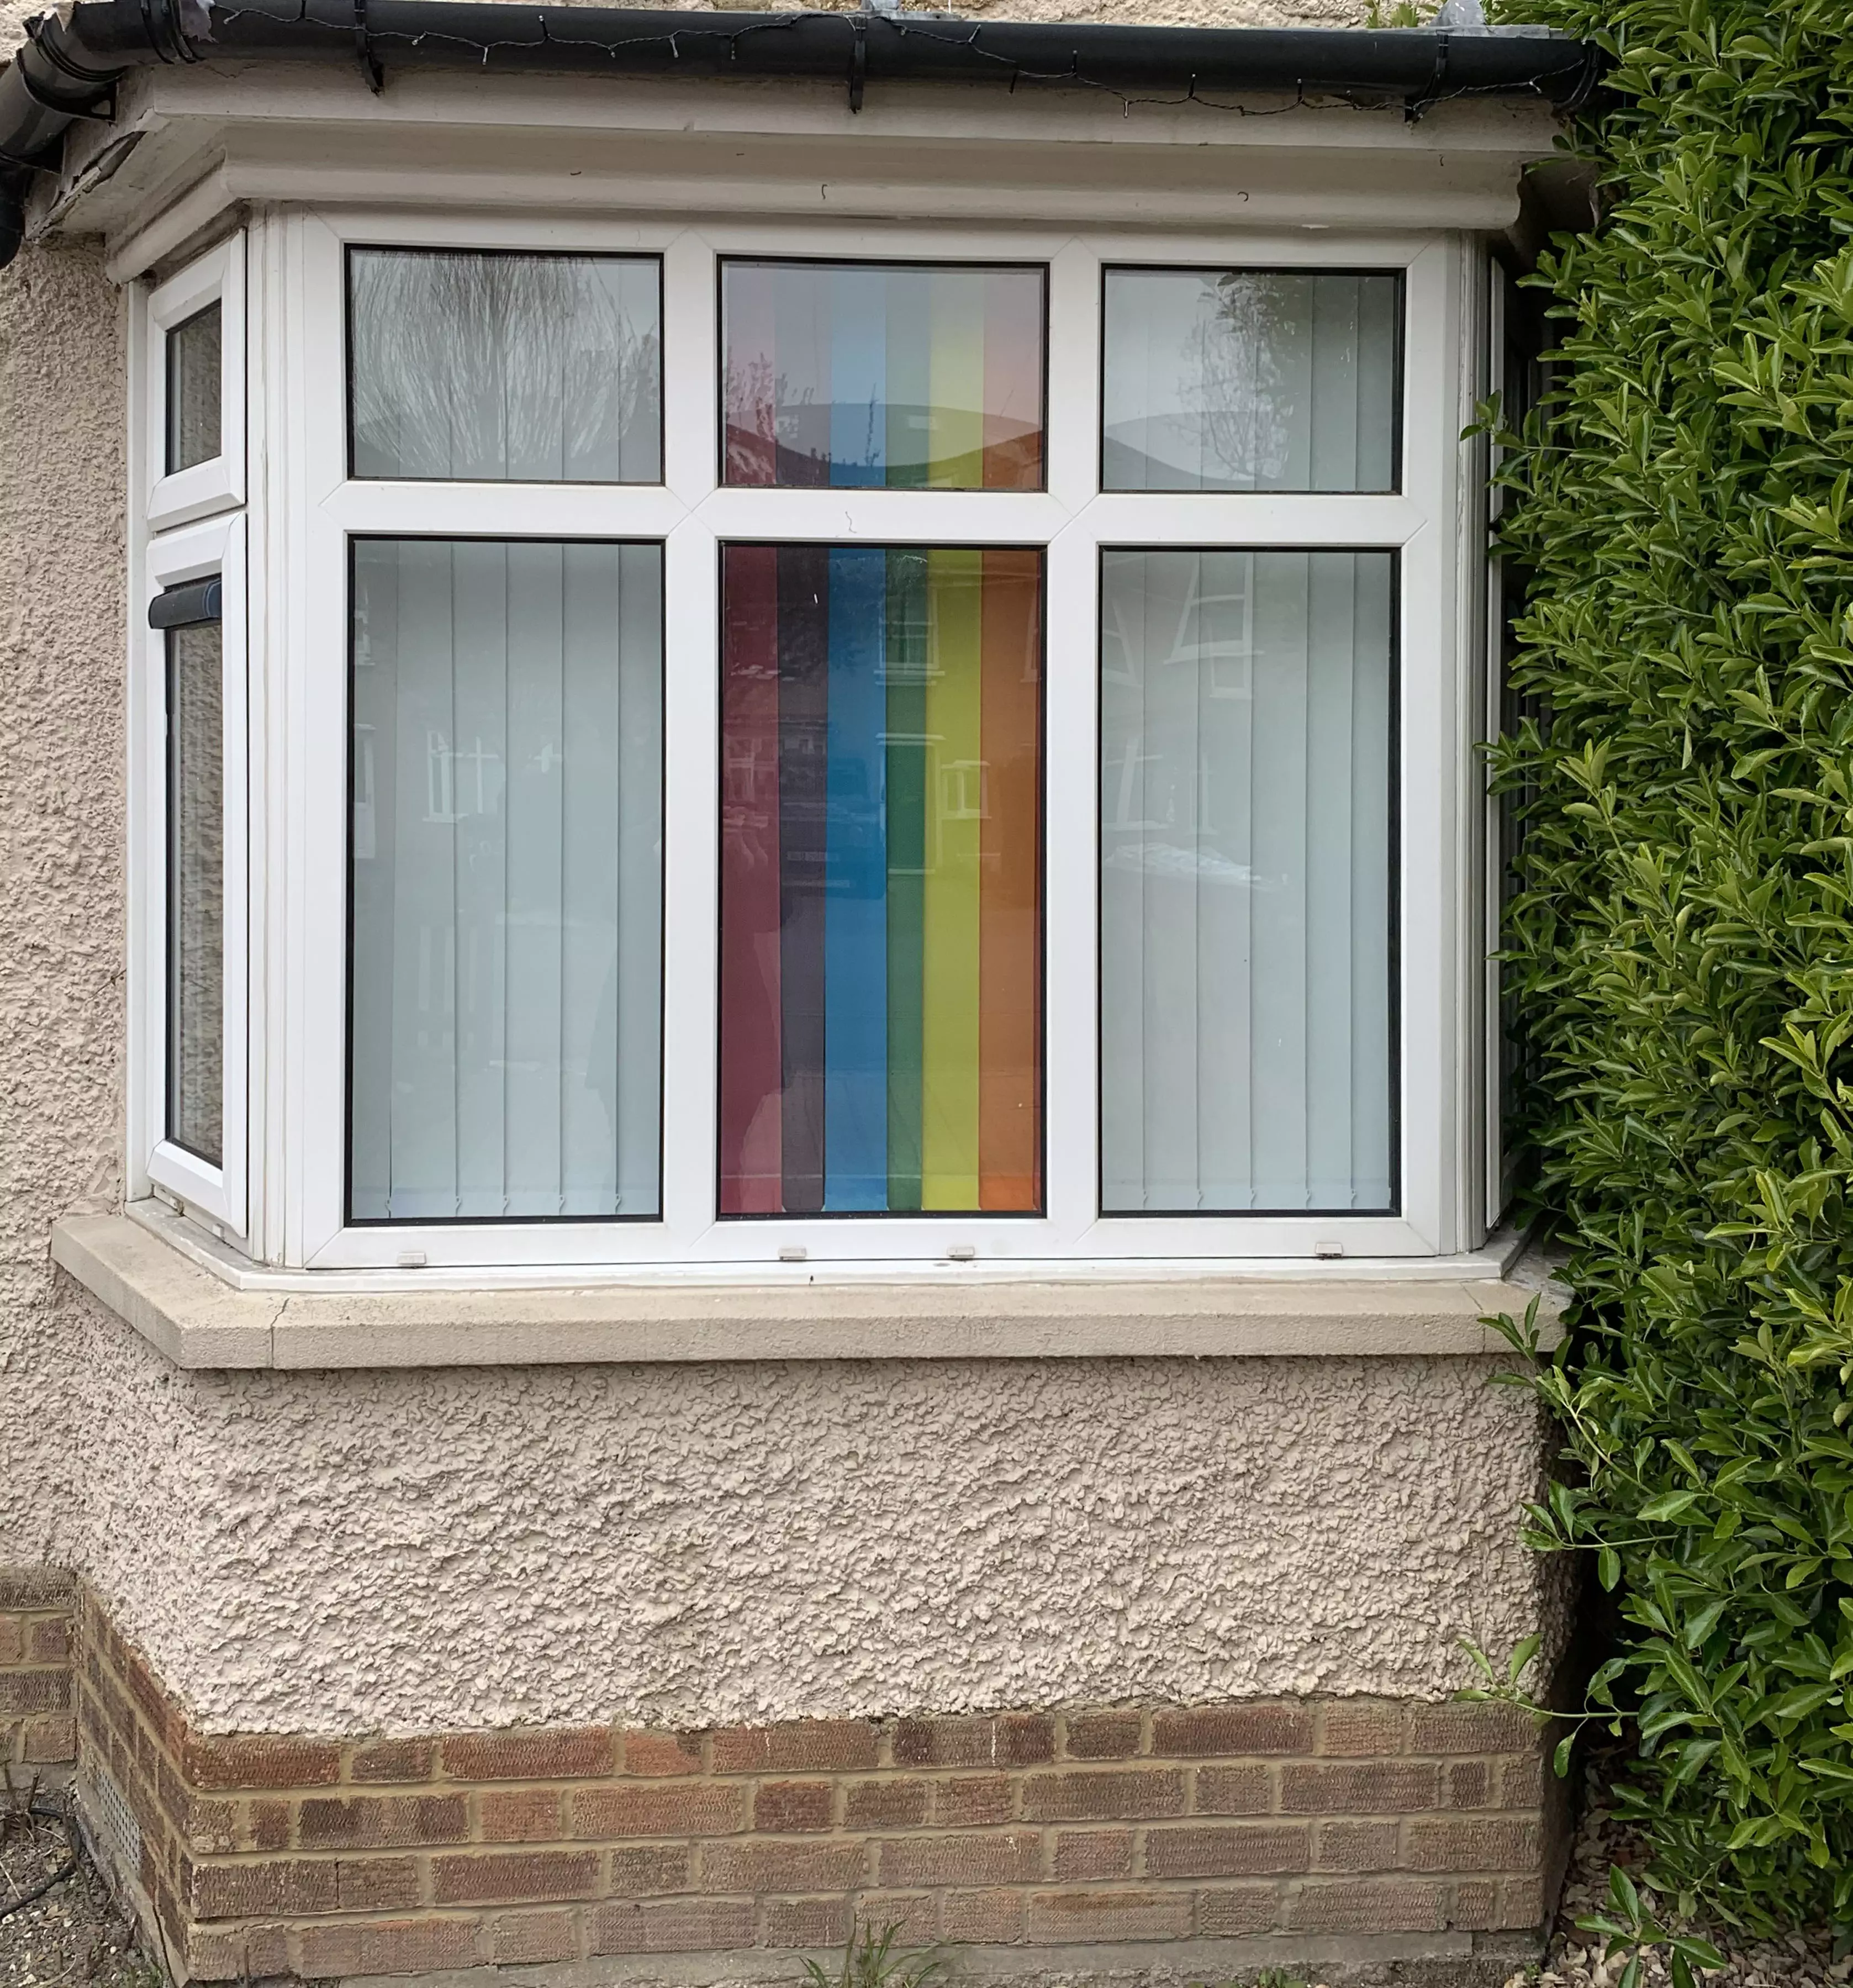 The rainbow blinds look amazing from the outside (